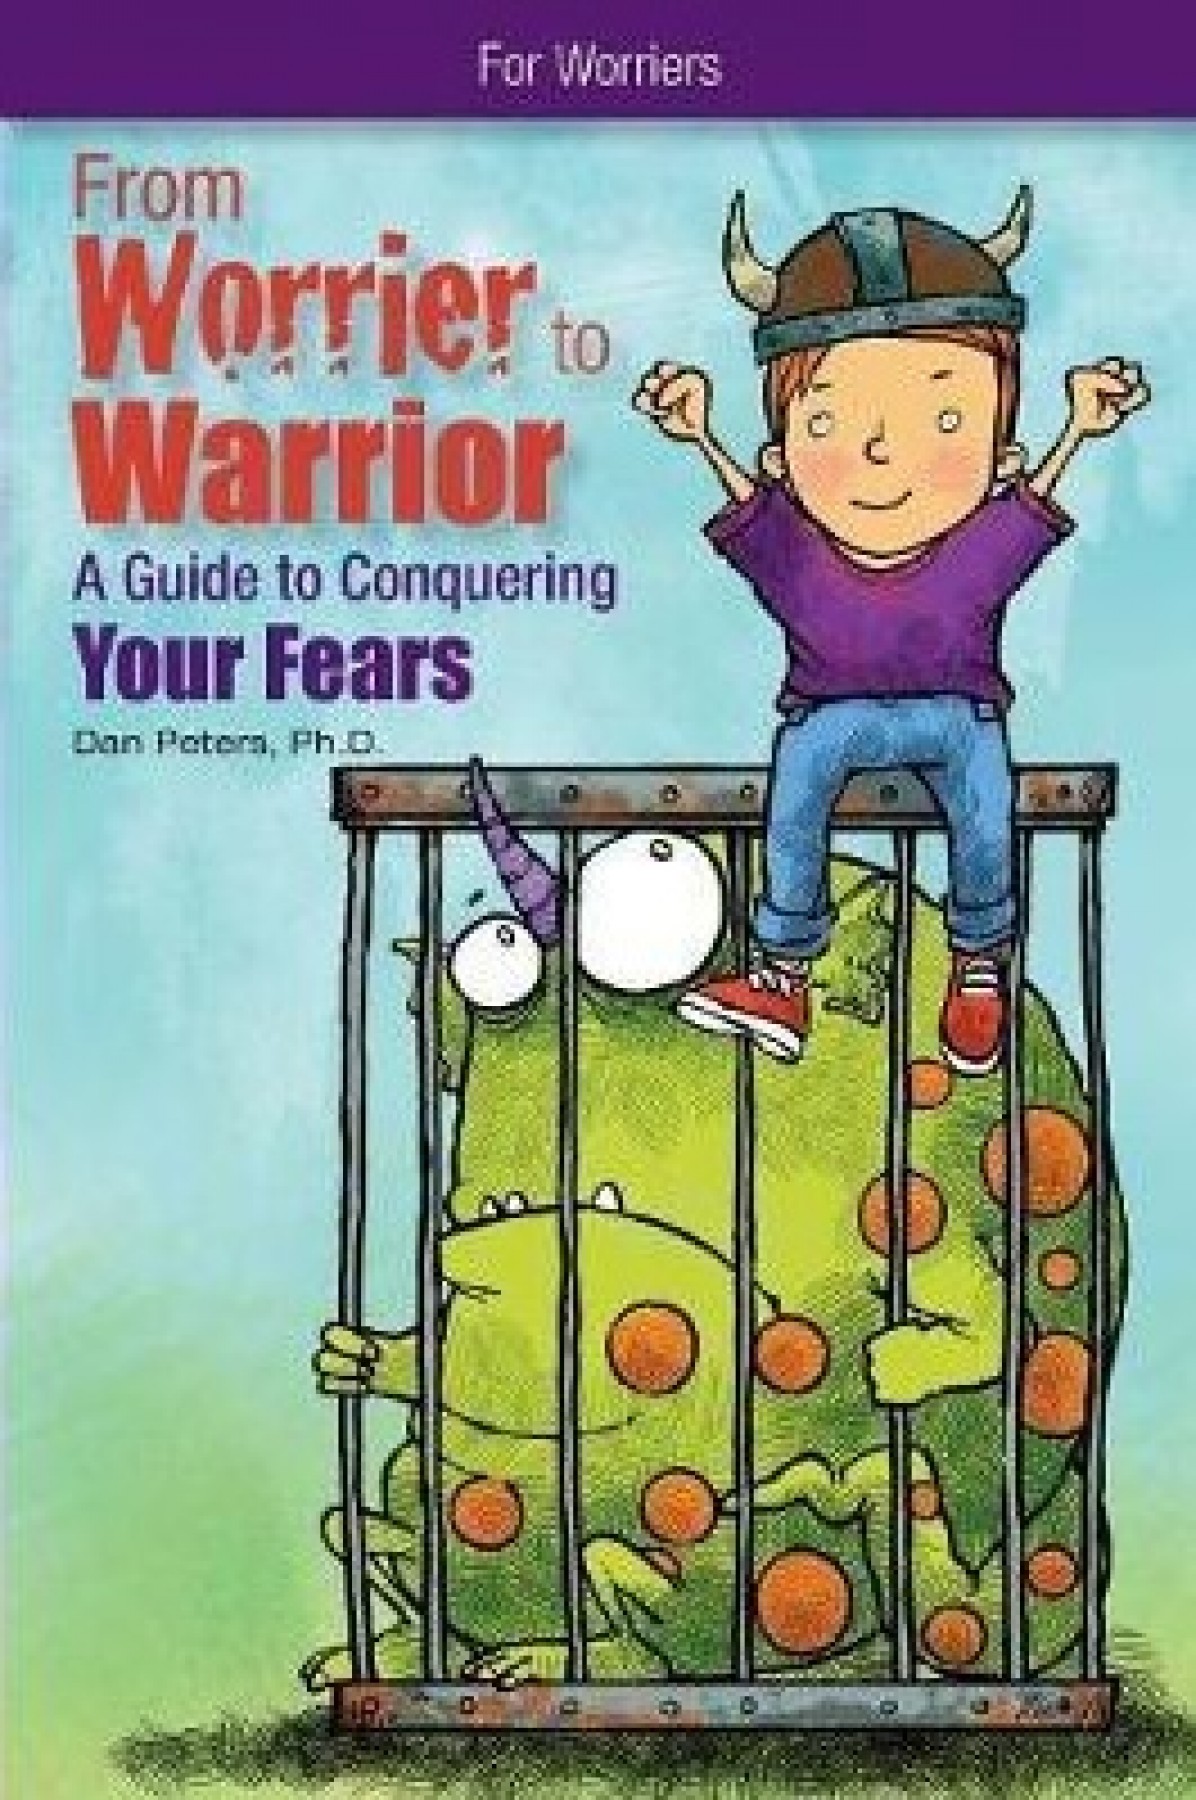 From worrier to warrior: A guide to conquering your fears